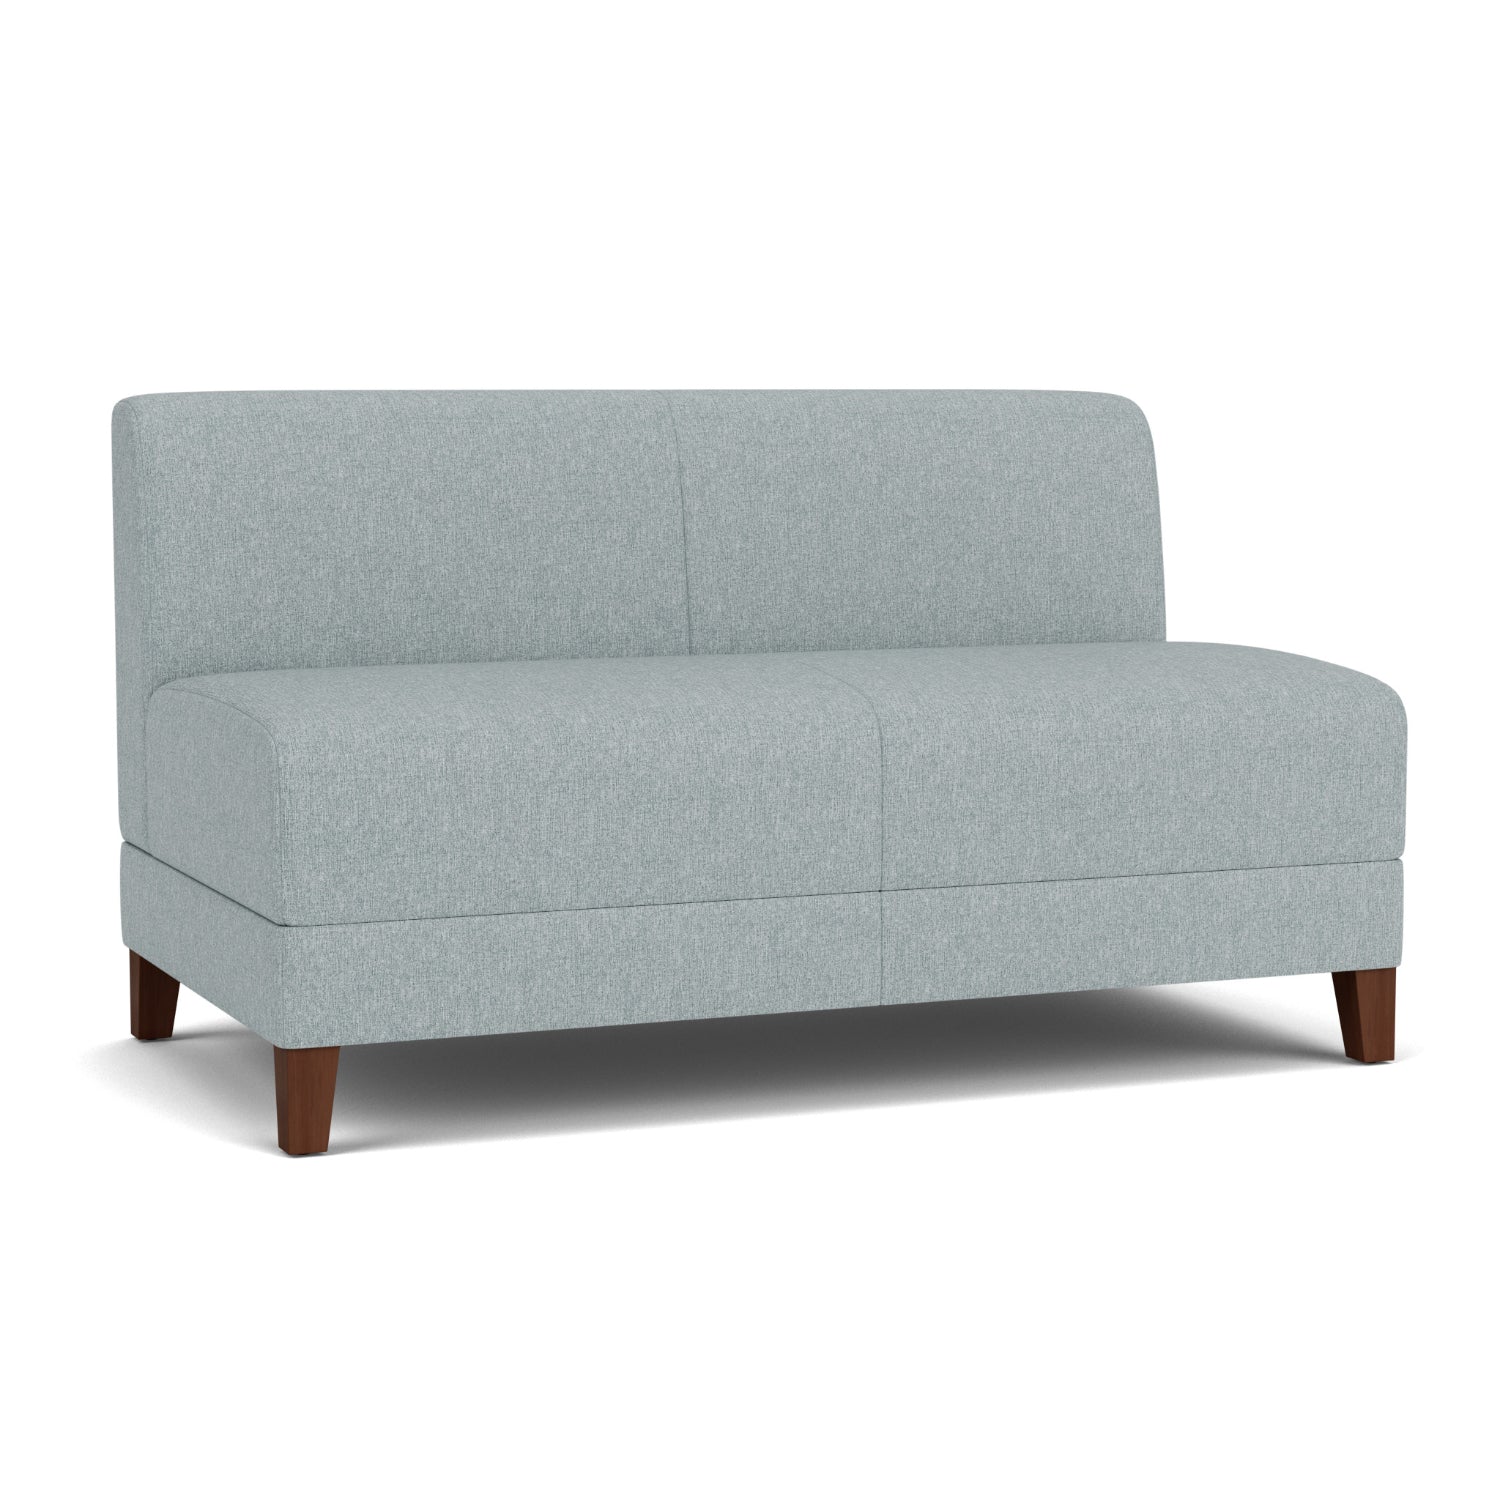 Fremont Collection Reception Seating, Armless Loveseat, Healthcare Vinyl Upholstery, FREE SHIPPING